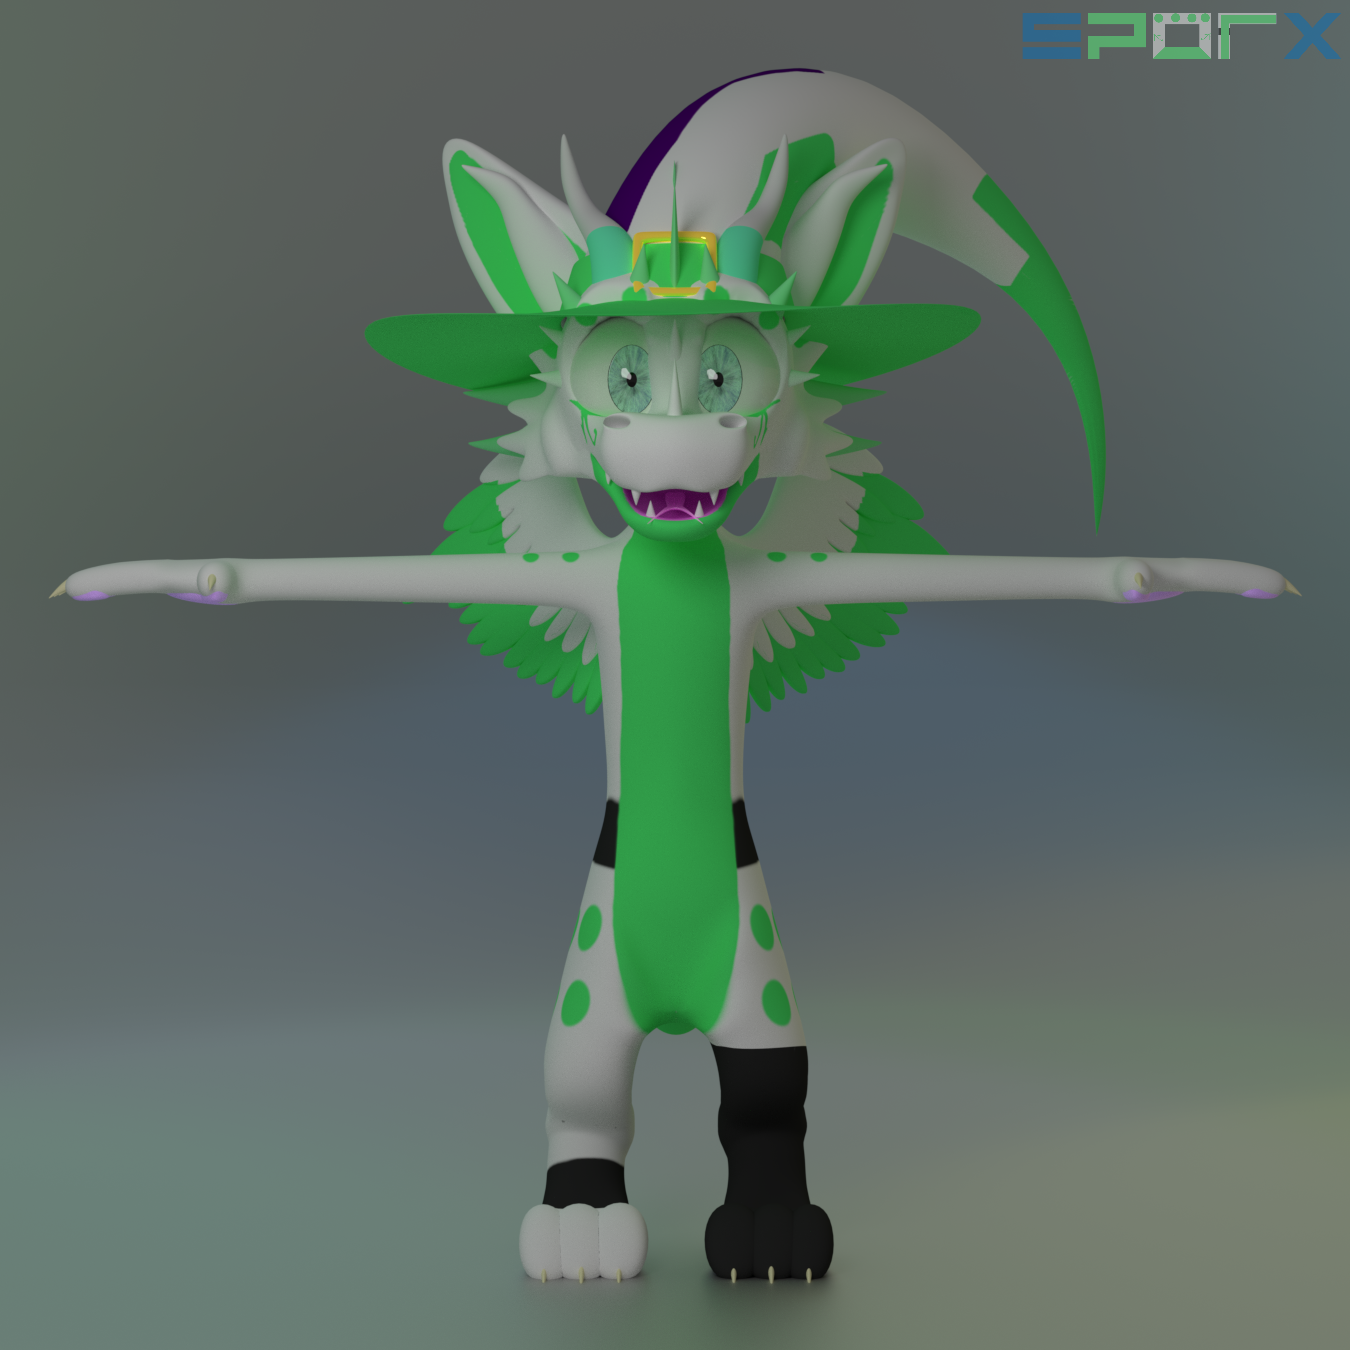 How To Make Any 3D Character T Pose In Blender 